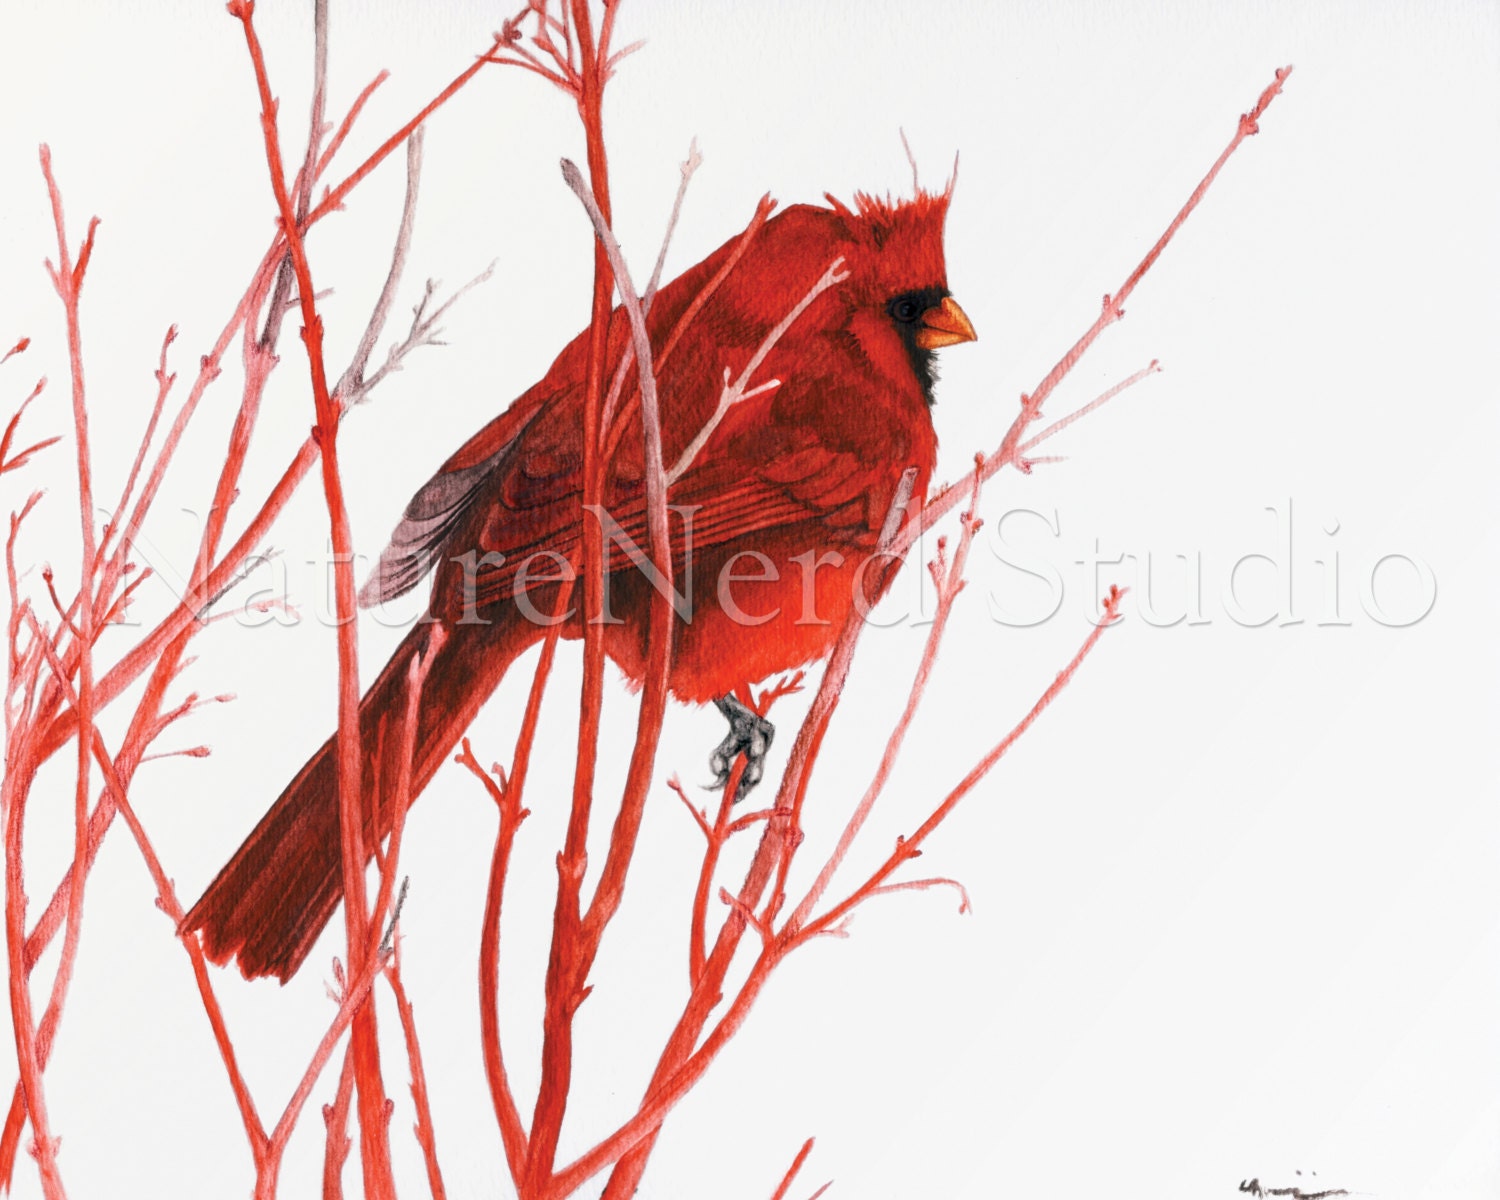 Northern Cardinal on Coral Bark Maple Branches "Red Cardinal Feeling Blue" - Watercolor, 8" x 10" Fine Art Print - NatureNerdStudio